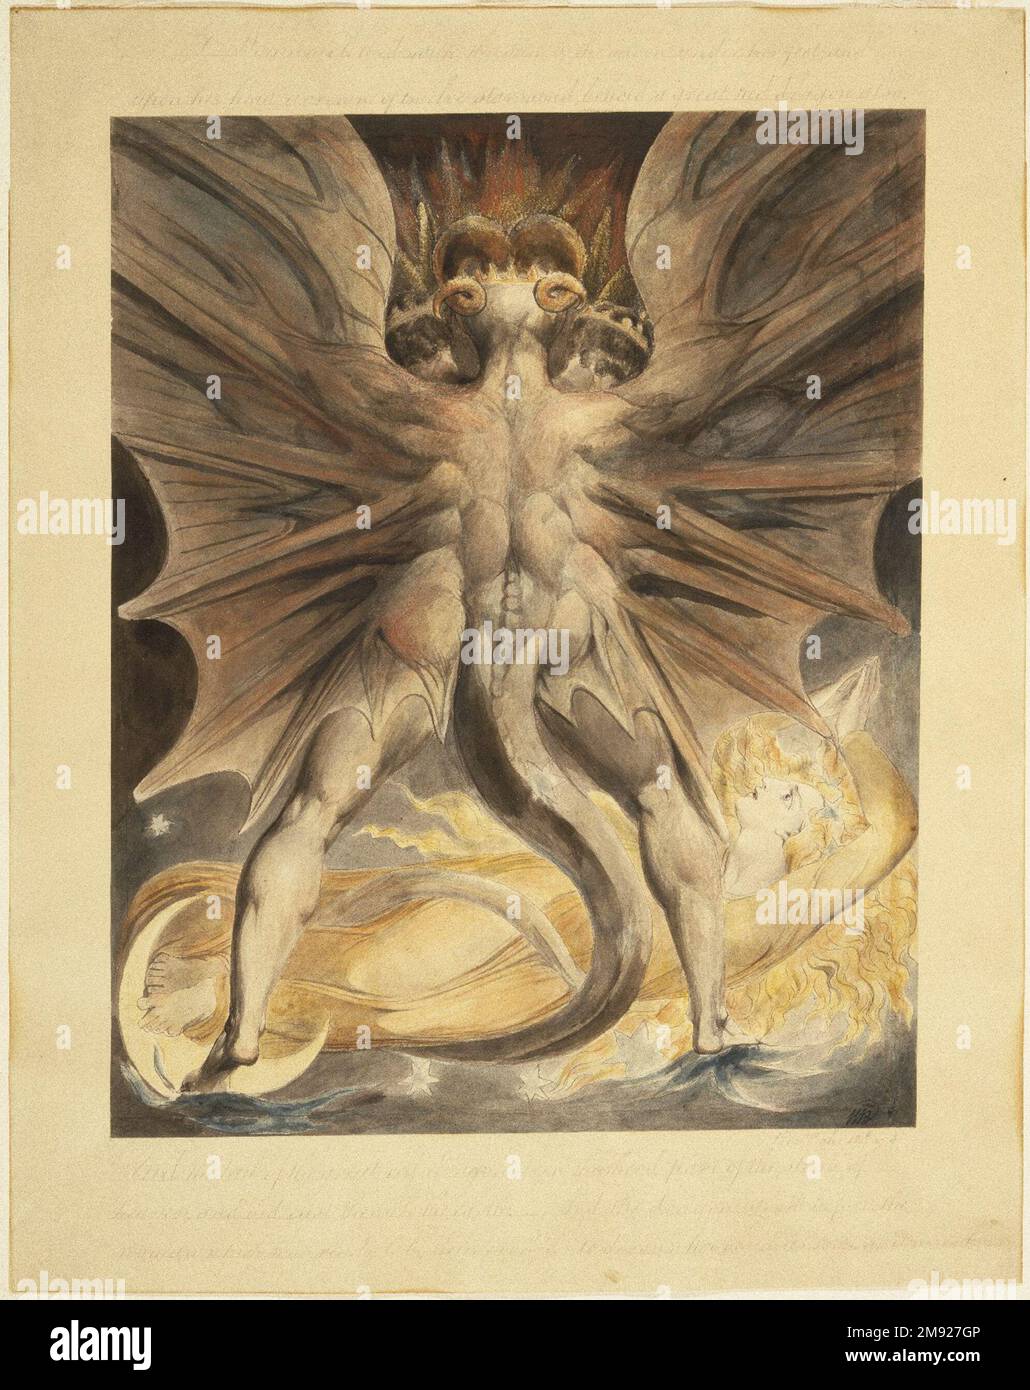 The Great Red Dragon and the Woman Clothed with the Sun (Rev. 12: 1-4) William Blake (British, 1757-1827). The Great Red Dragon and the Woman Clothed with the Sun (Rev. 12: 1-4), ca. 1803-1805. Black ink and watercolor over traces of graphite and incised lines on wove paper, Image: 17 3/16 x 13 11/16 in. (43.7 x 34.8 cm).  After the French Revolution, artists such as the printmaker, painter, and poet William Blake drew subject matter from the biblical book of Revelation to contemplate the tumult of their era. This watercolor refers to the appearance of “a great wonder in heaven, a woman clothe Stock Photo